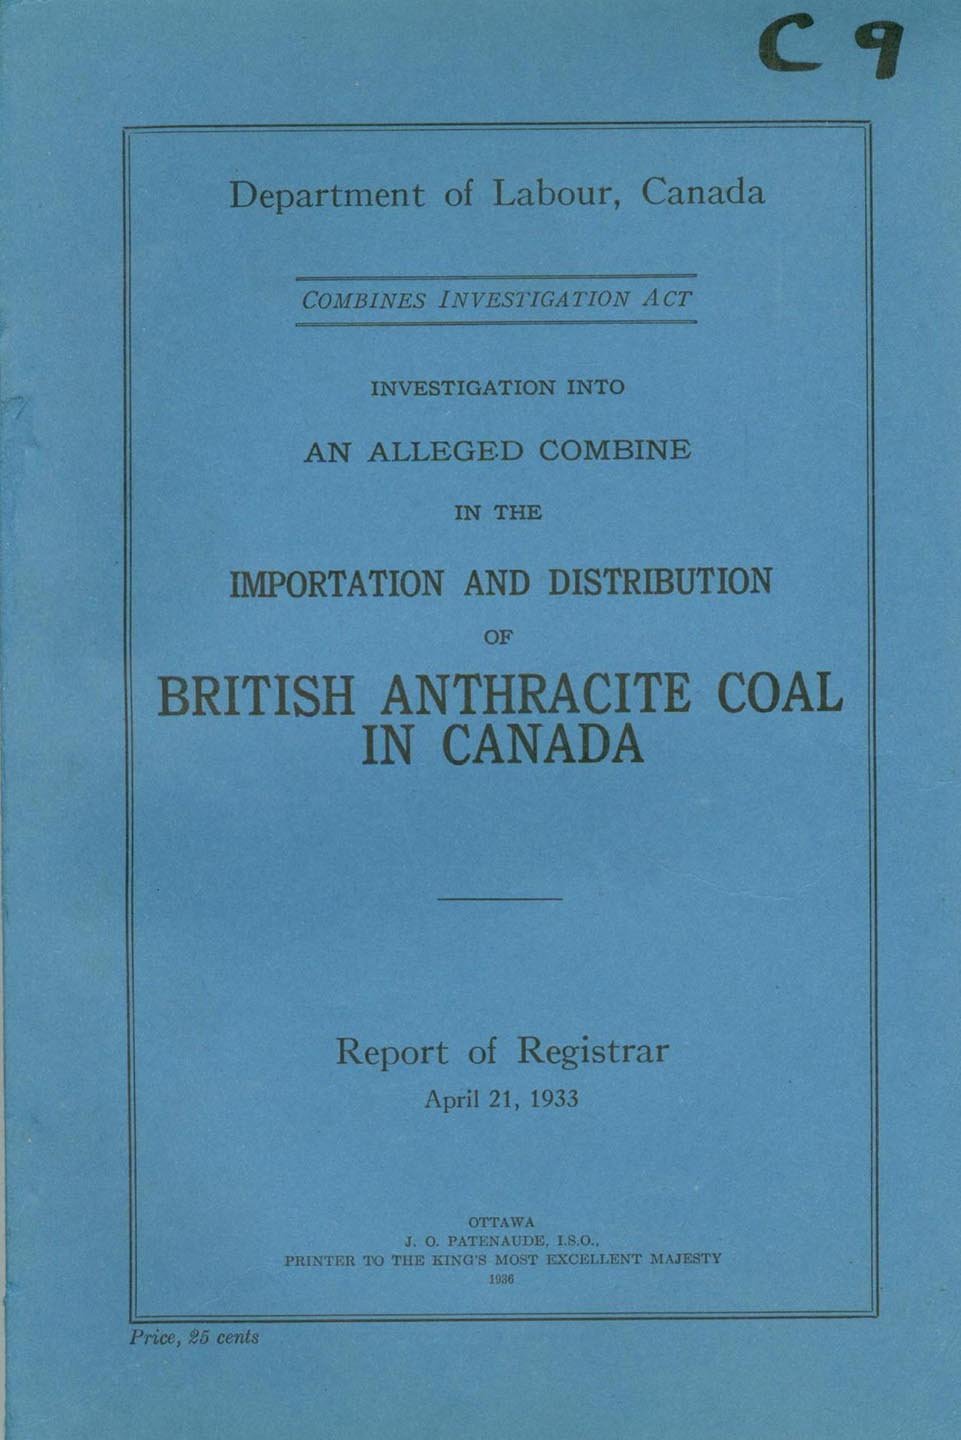 Investigation into an Alleged Combine in the Importation and Distribution of British Anthracite Coal in Canada